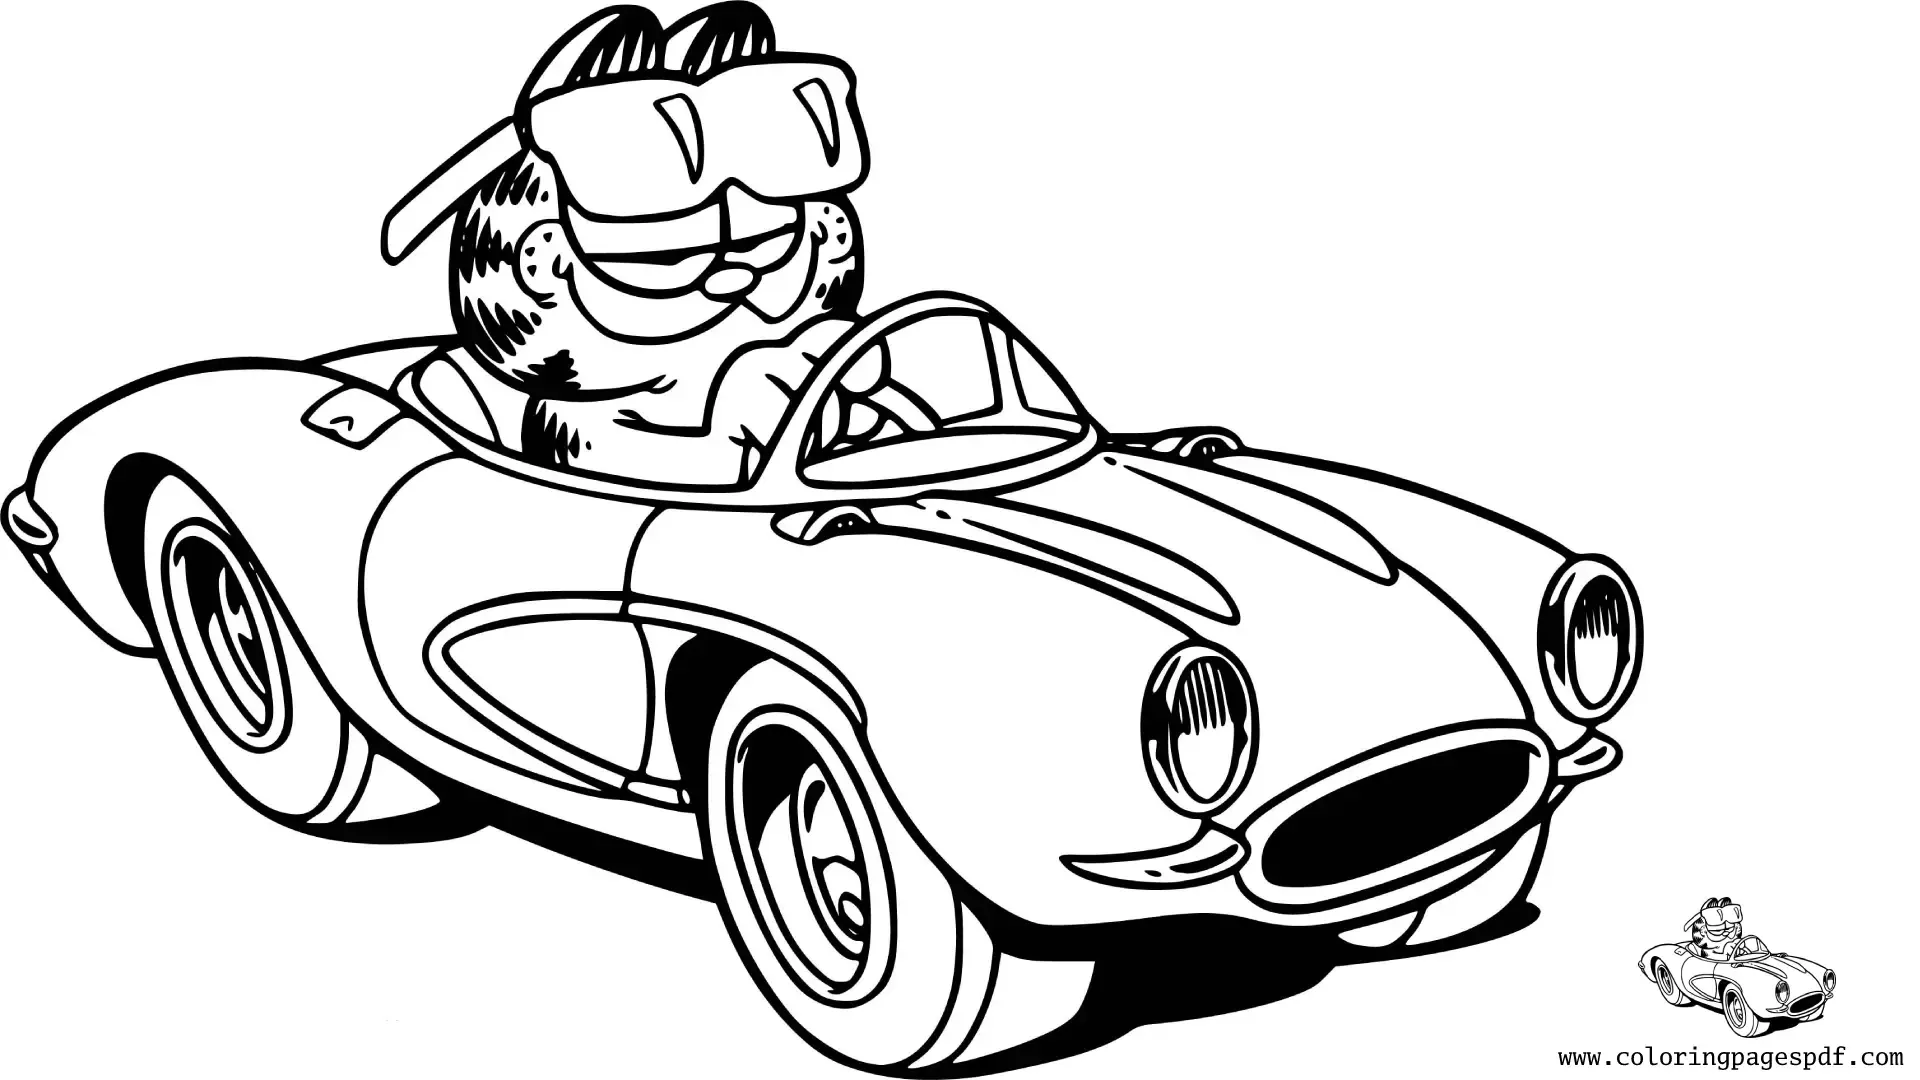 Coloring Pages Of Garfield Driving A Car